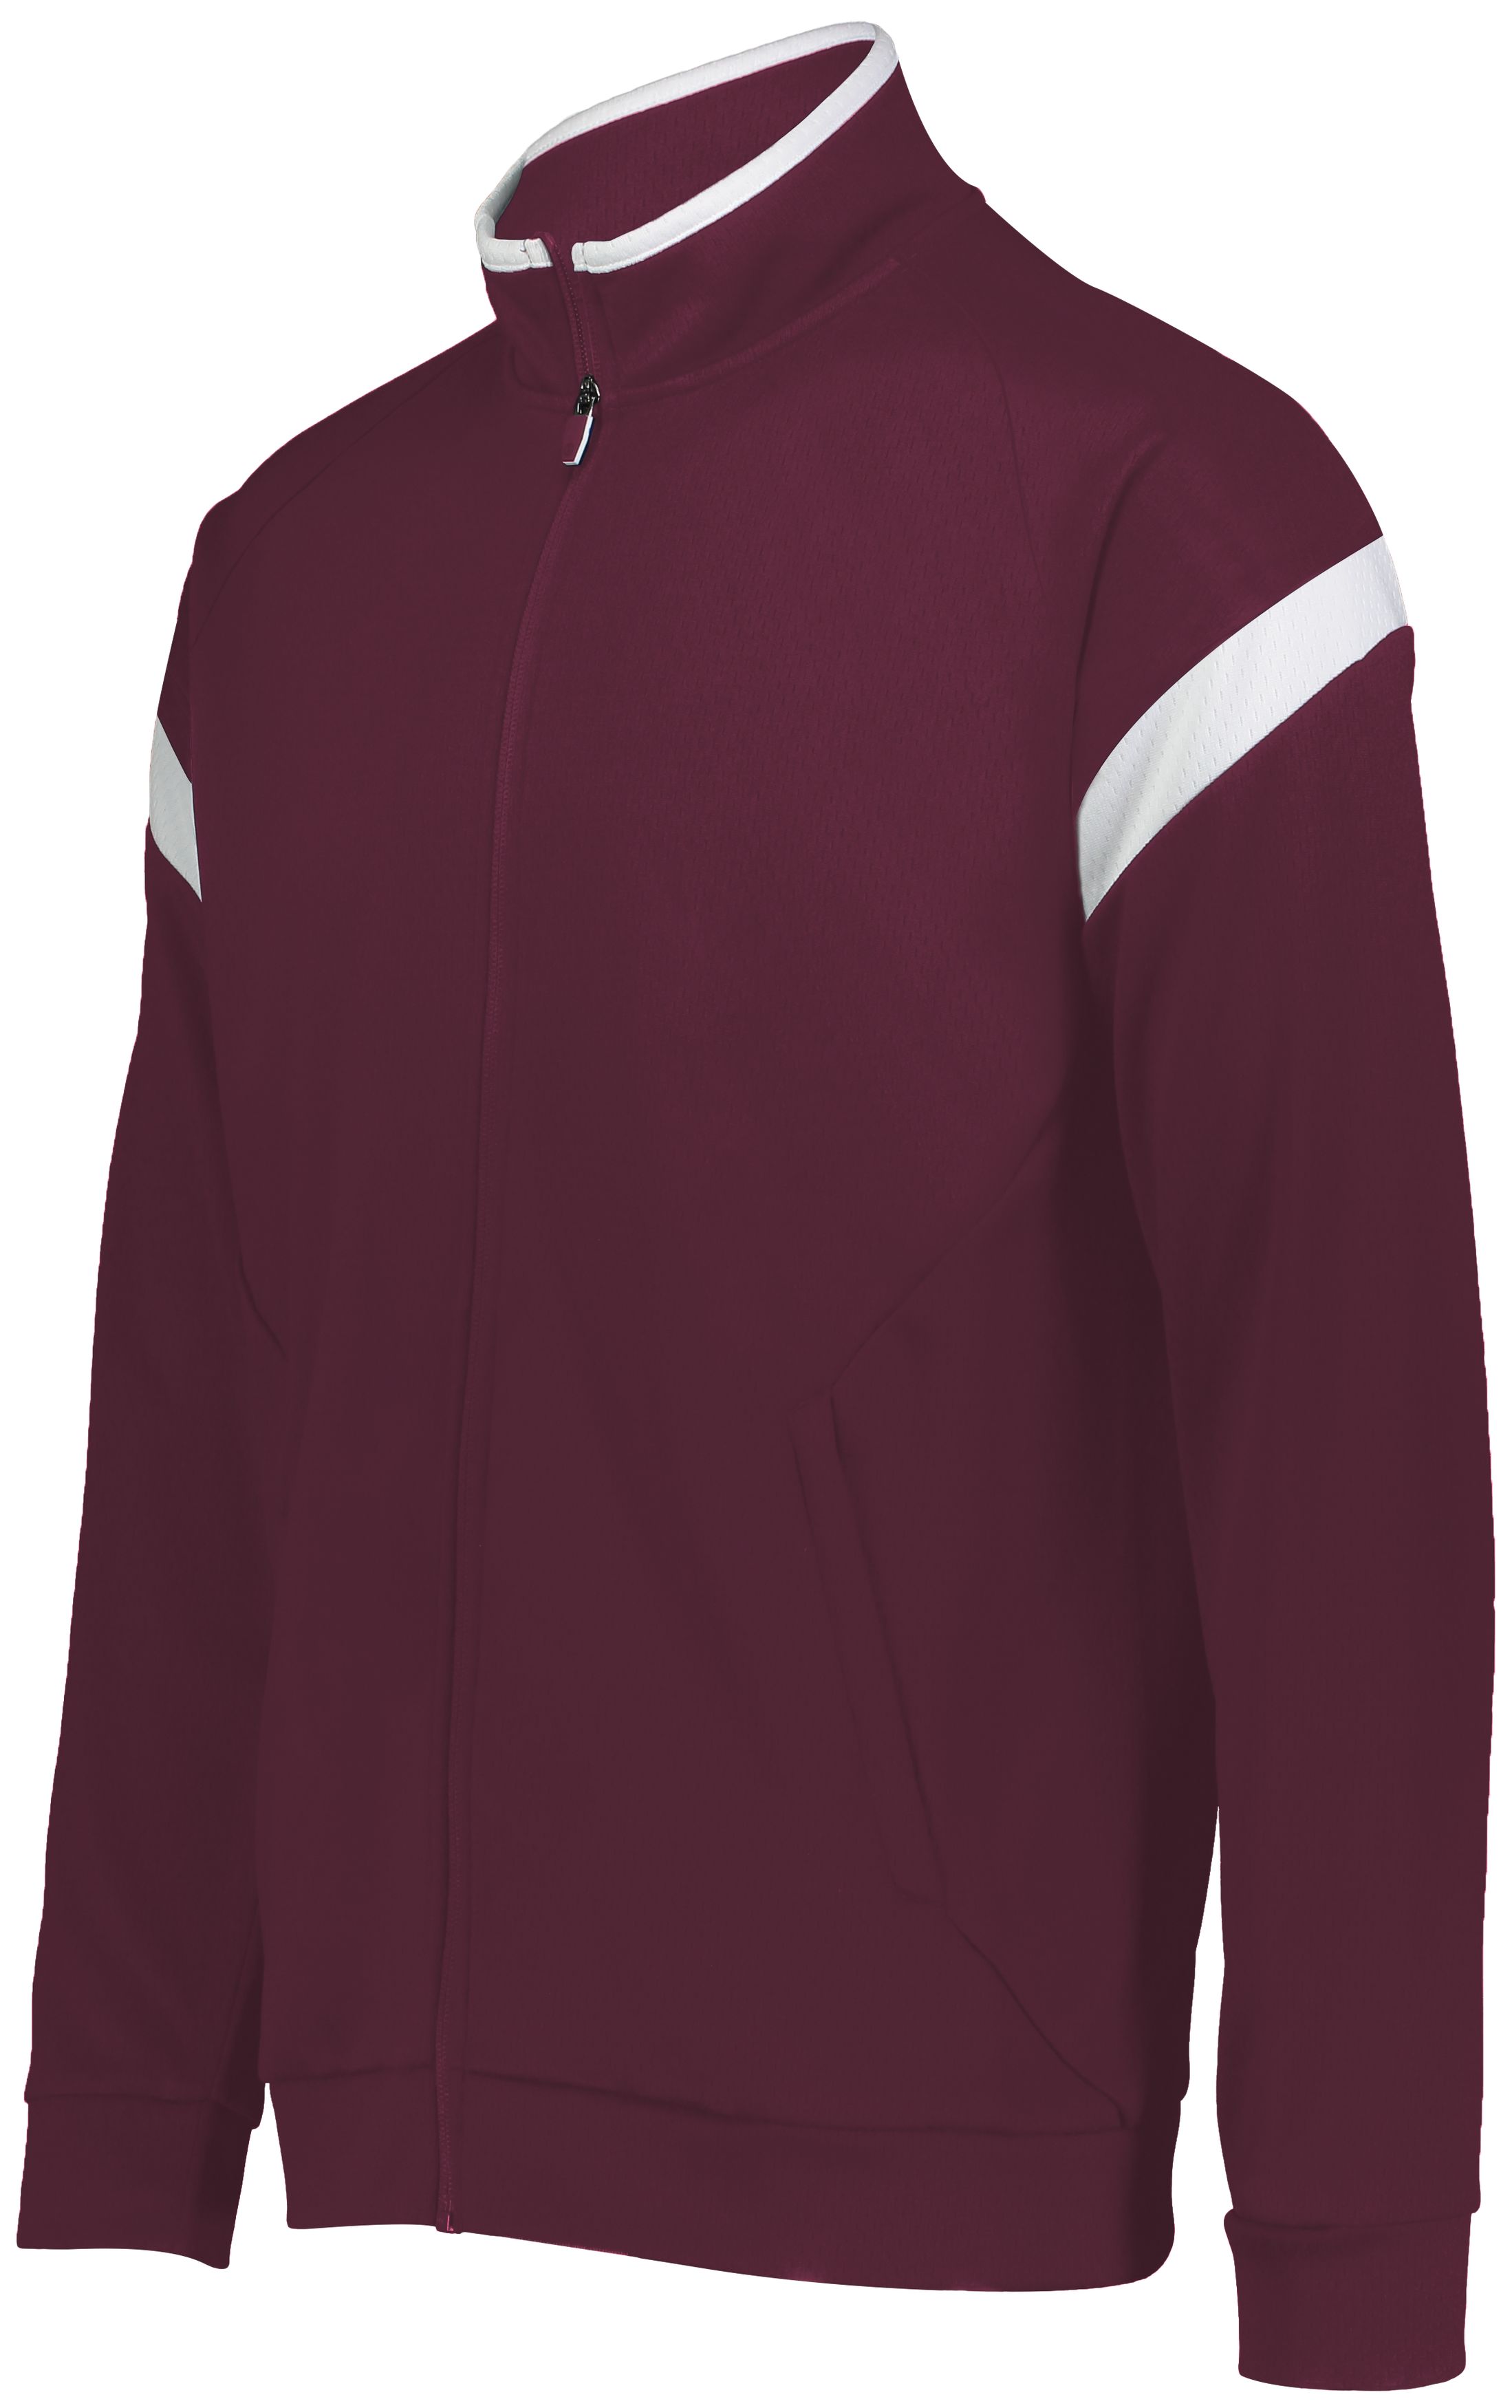 Selected Color is Wht/Maroon/White